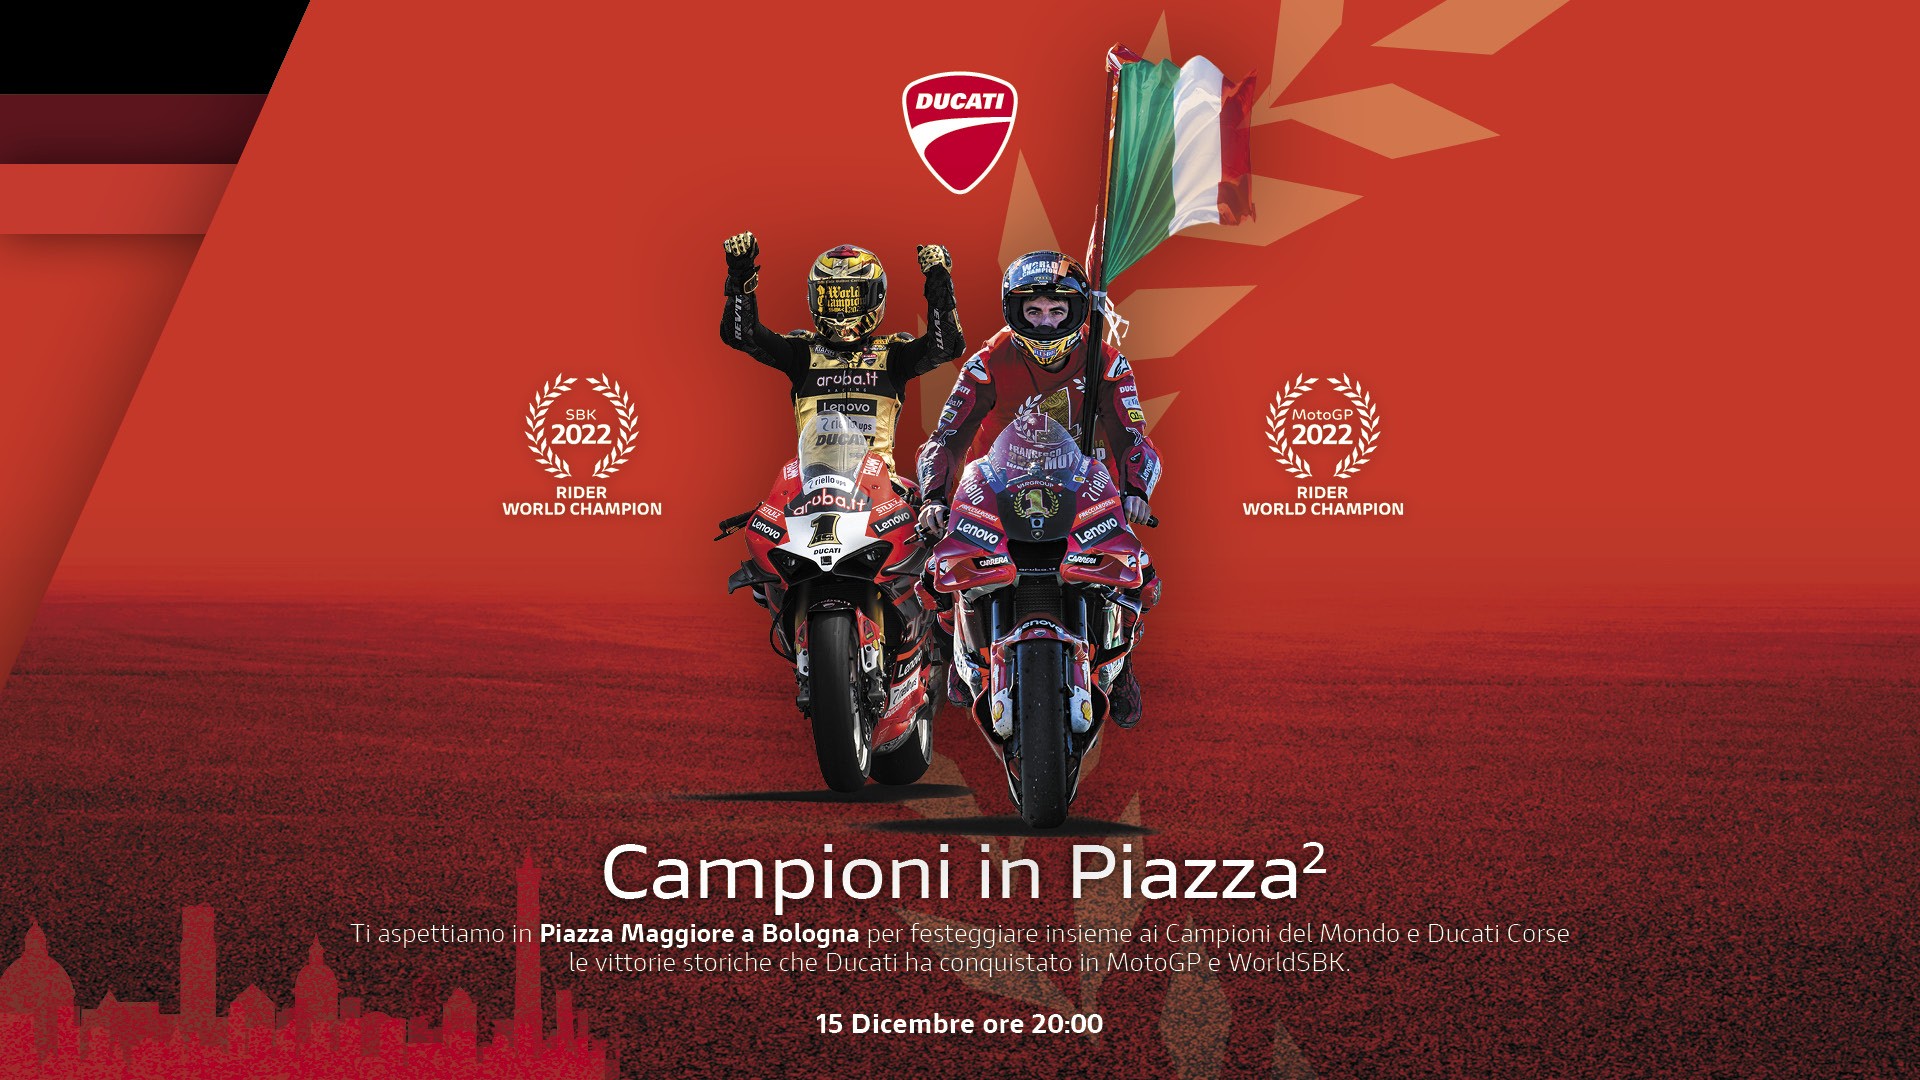 Campioni in Piazza²: the party that on December 15 will celebrate Ducati’s double World Title in Bologna.